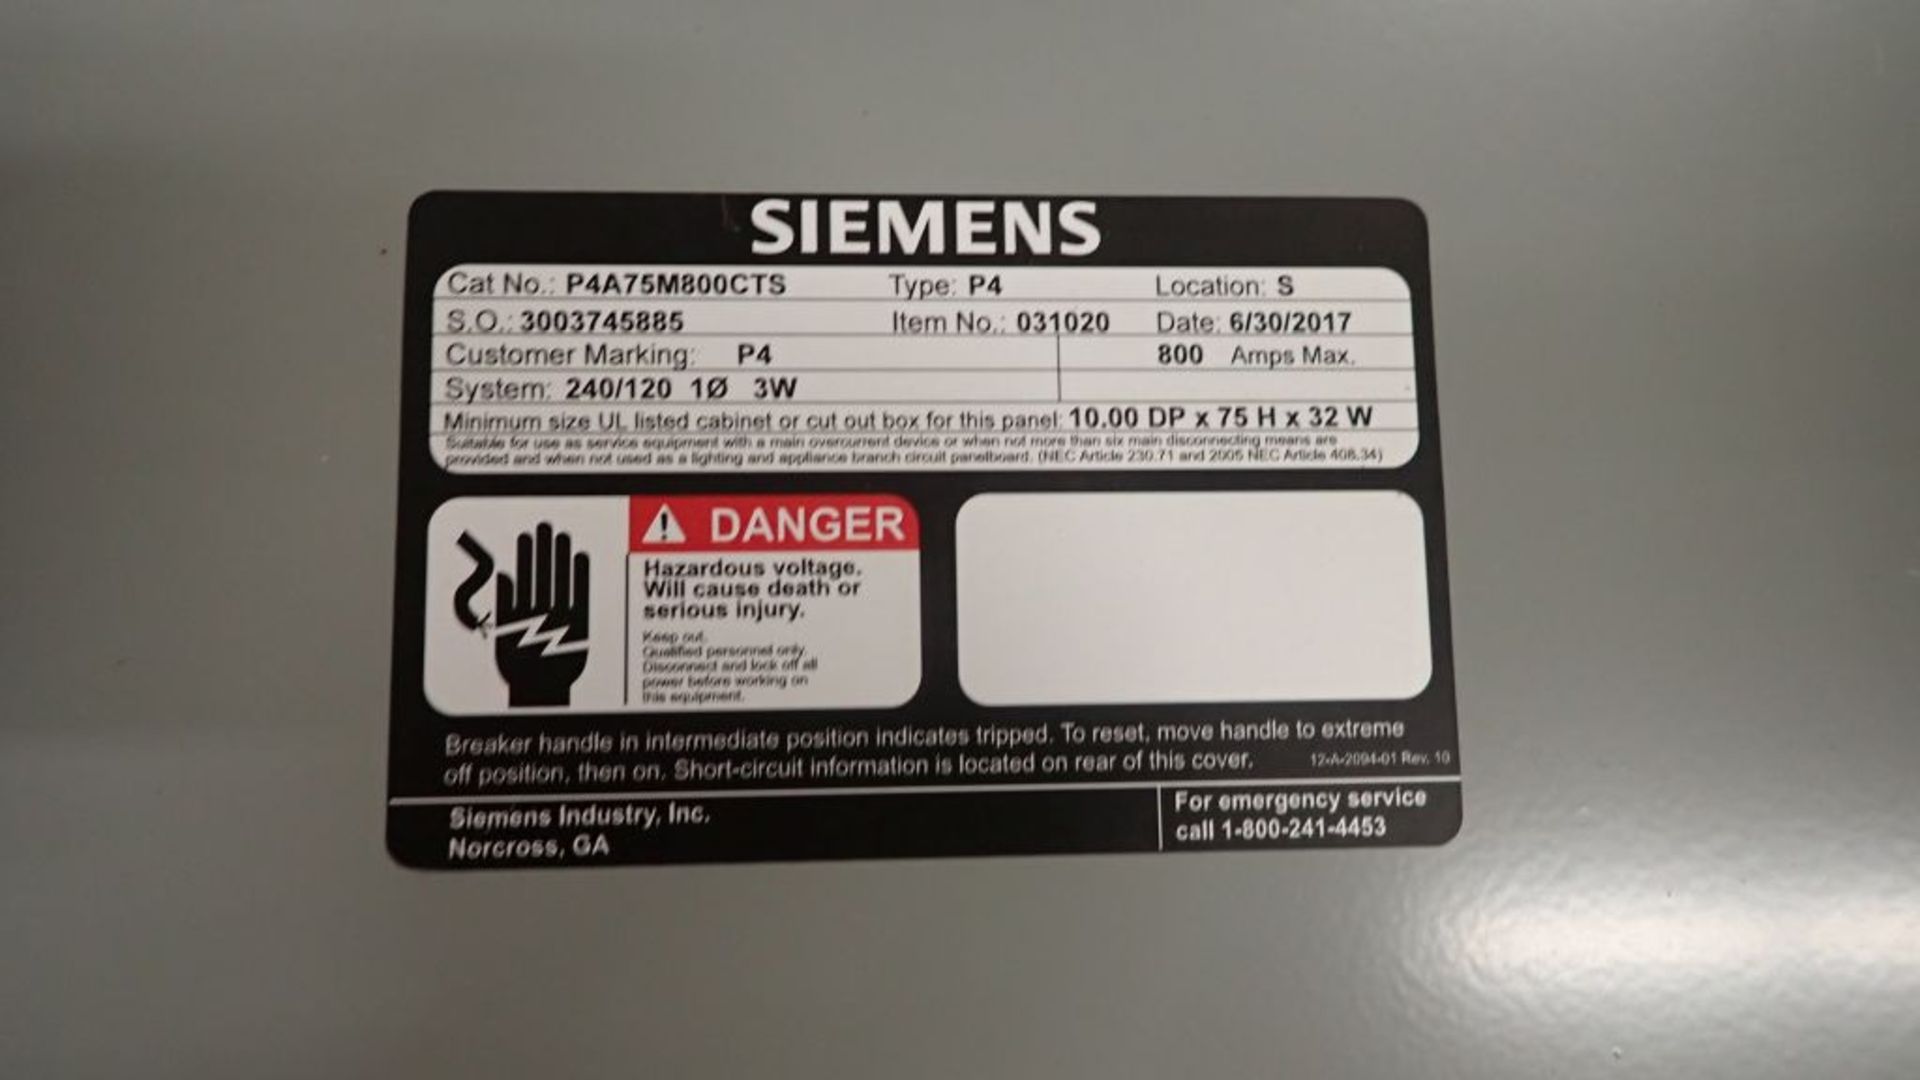 Siemens Power Panel | Cat No. P4A75M800CTS; 800A Max; 3-Wire; 1PH; Tag: 245631 - Image 14 of 18